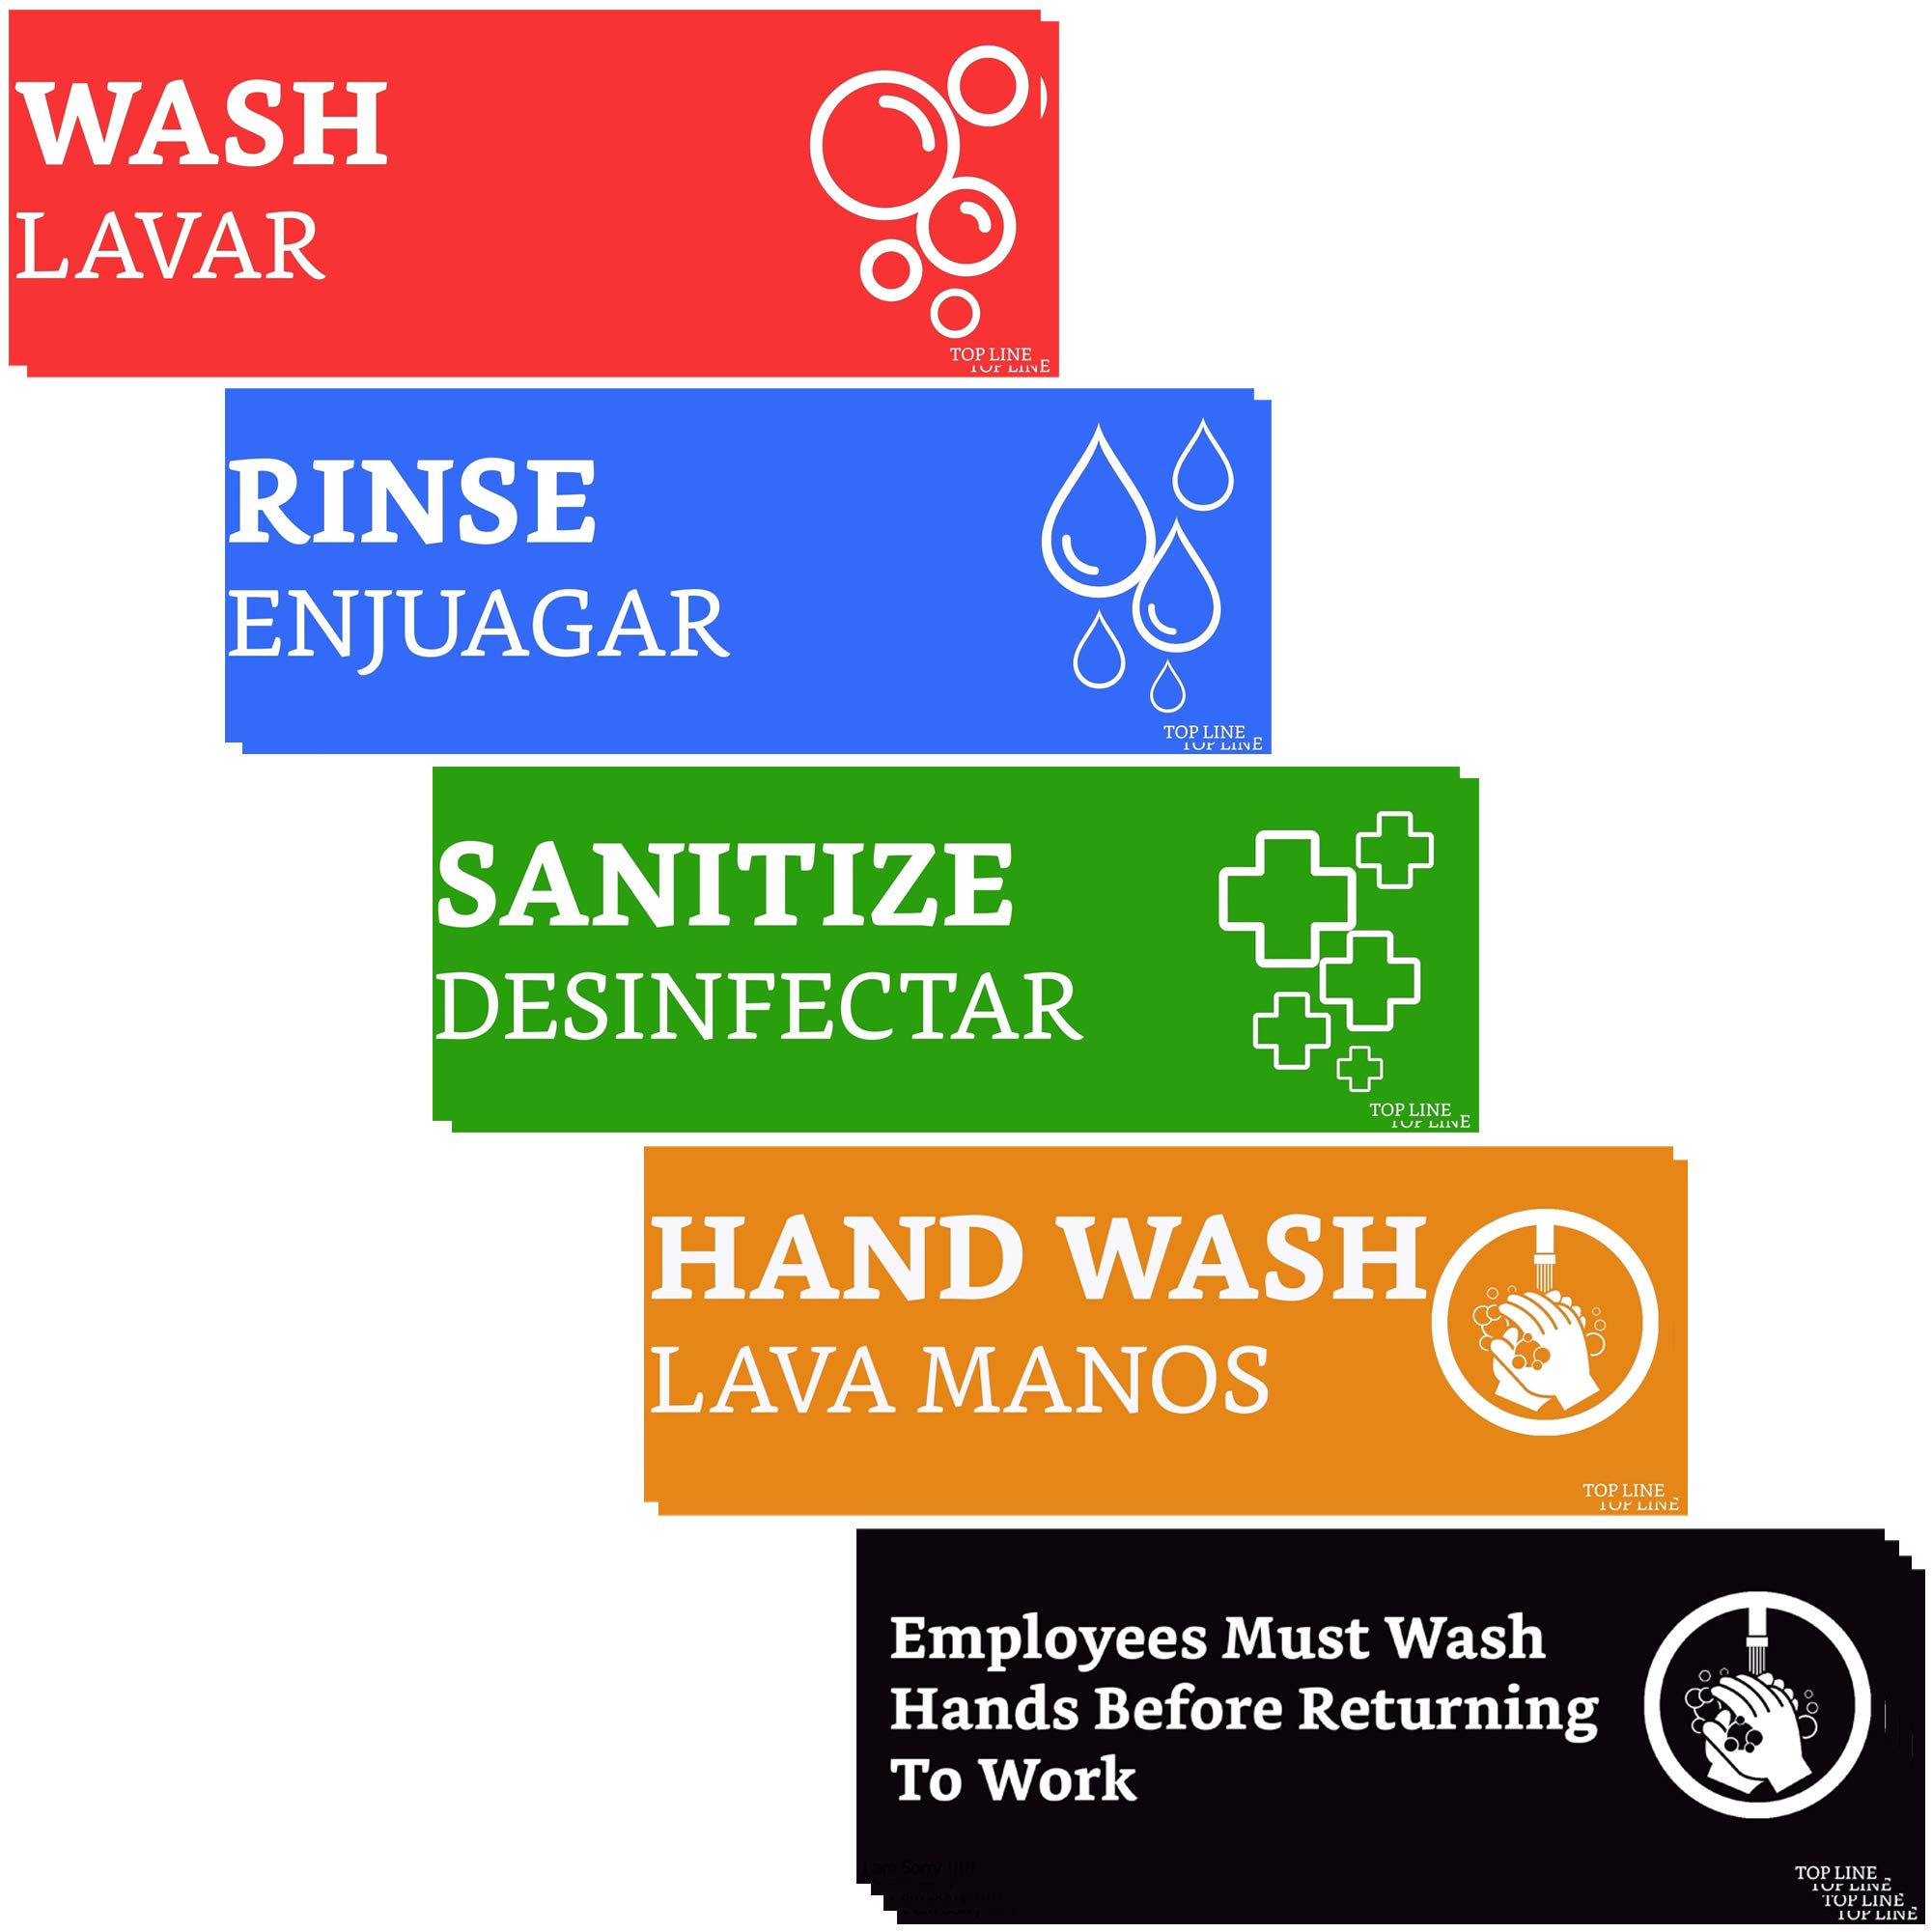 Wash Rinse Sanitize Sink Labels Signs with Wash Hands Sign (12 Labels - 2 FULL SETS 7.3 x 2.5 in) - Ideal for Restaurant Sinks, 3 Compartment Sink, Food Trucks, Commercial Kitchens & More